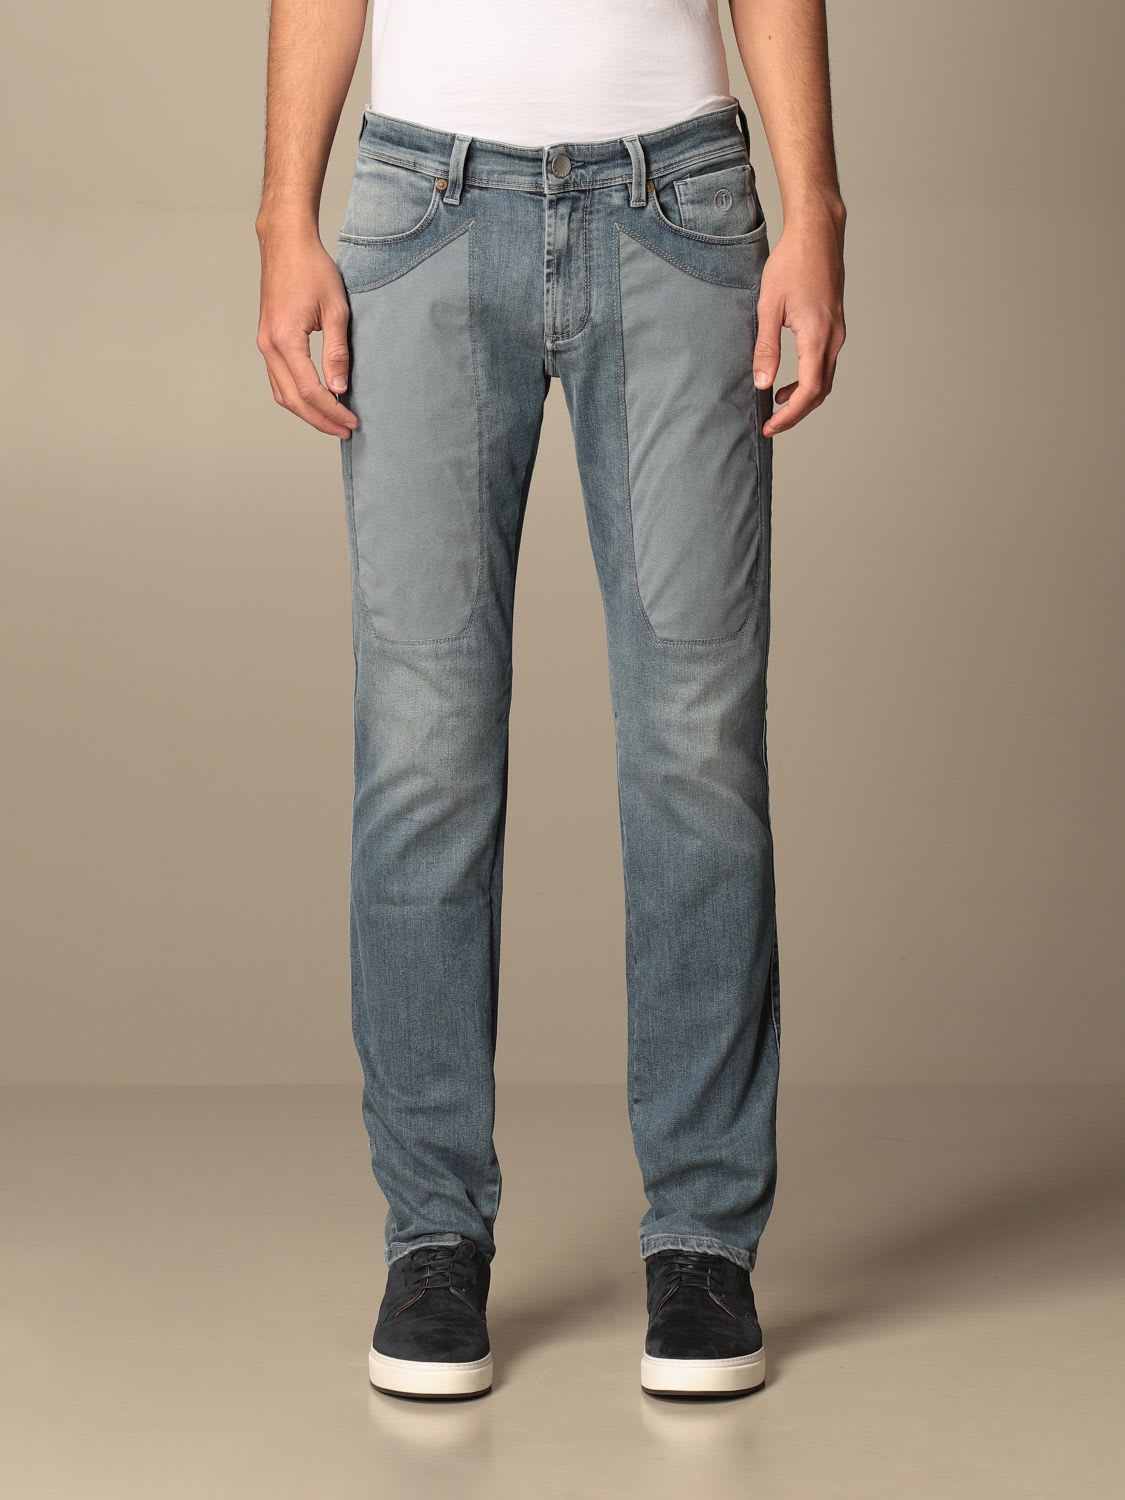 Jeckerson Jeans Jeckerson 5-pocket Jeans With Alcantara Patches